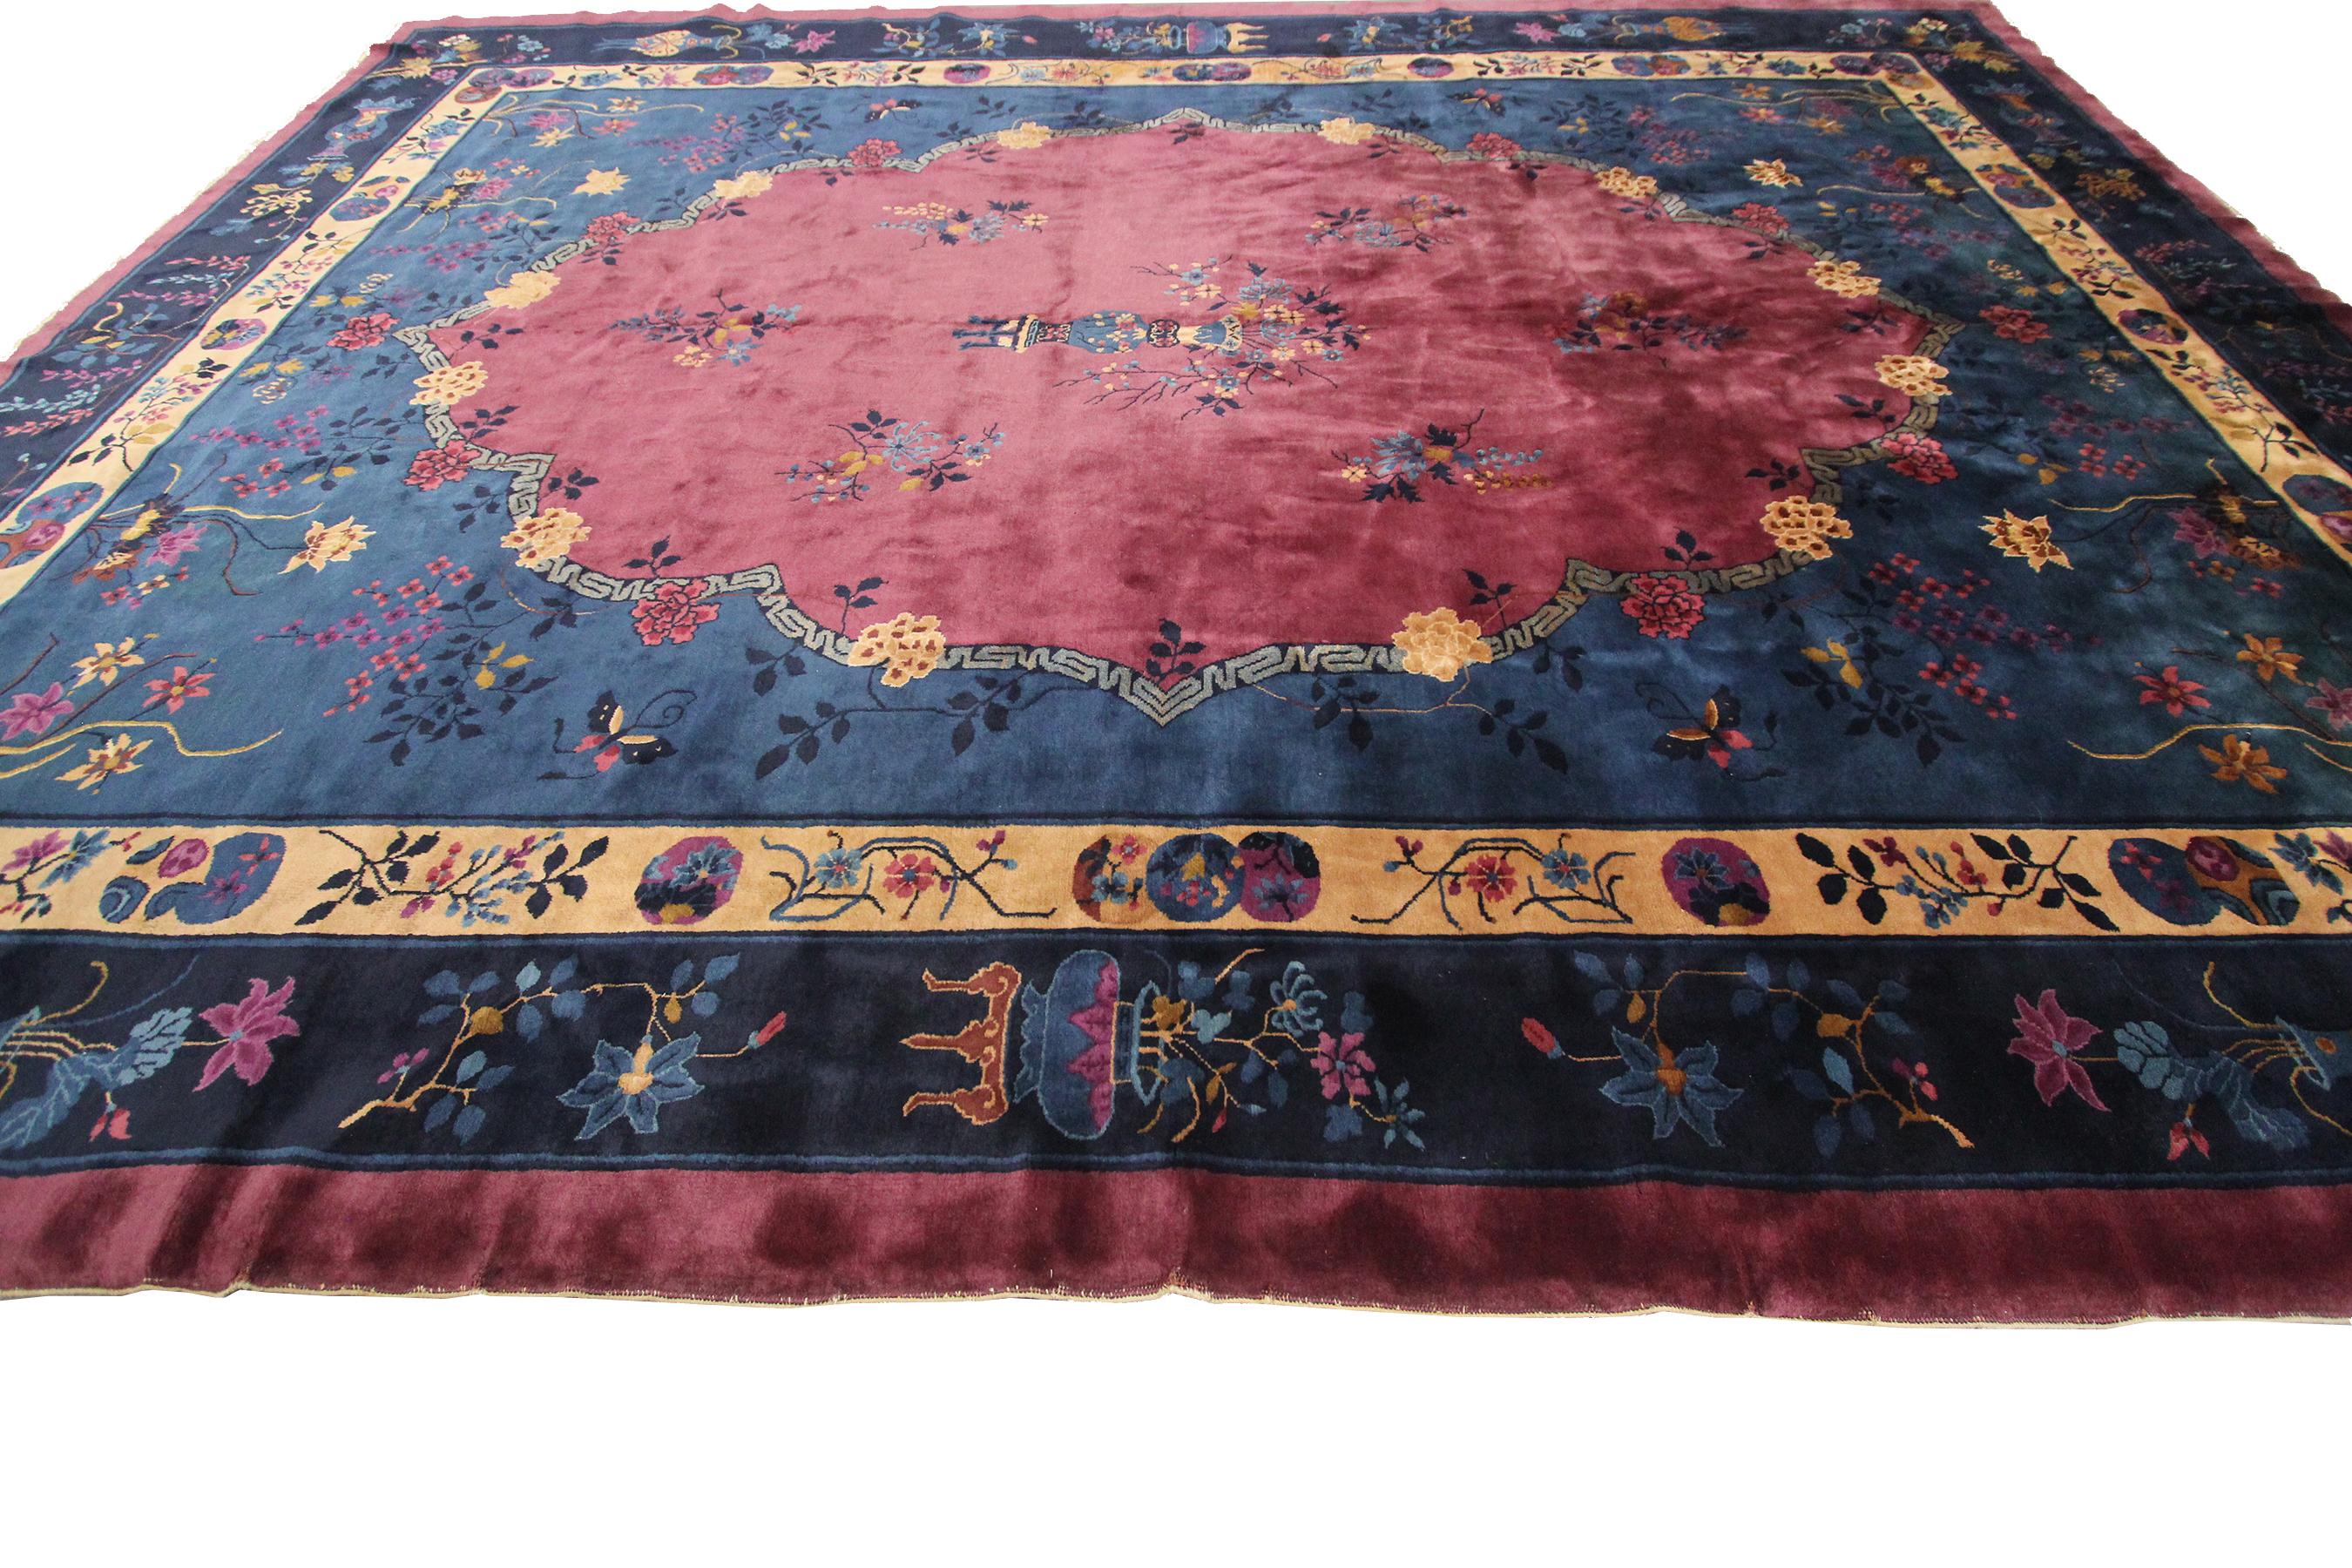 Antique Art Deco Rug Antique Art Nouveau Rug Chinese Rug 1920 Purple In Good Condition For Sale In New York, NY